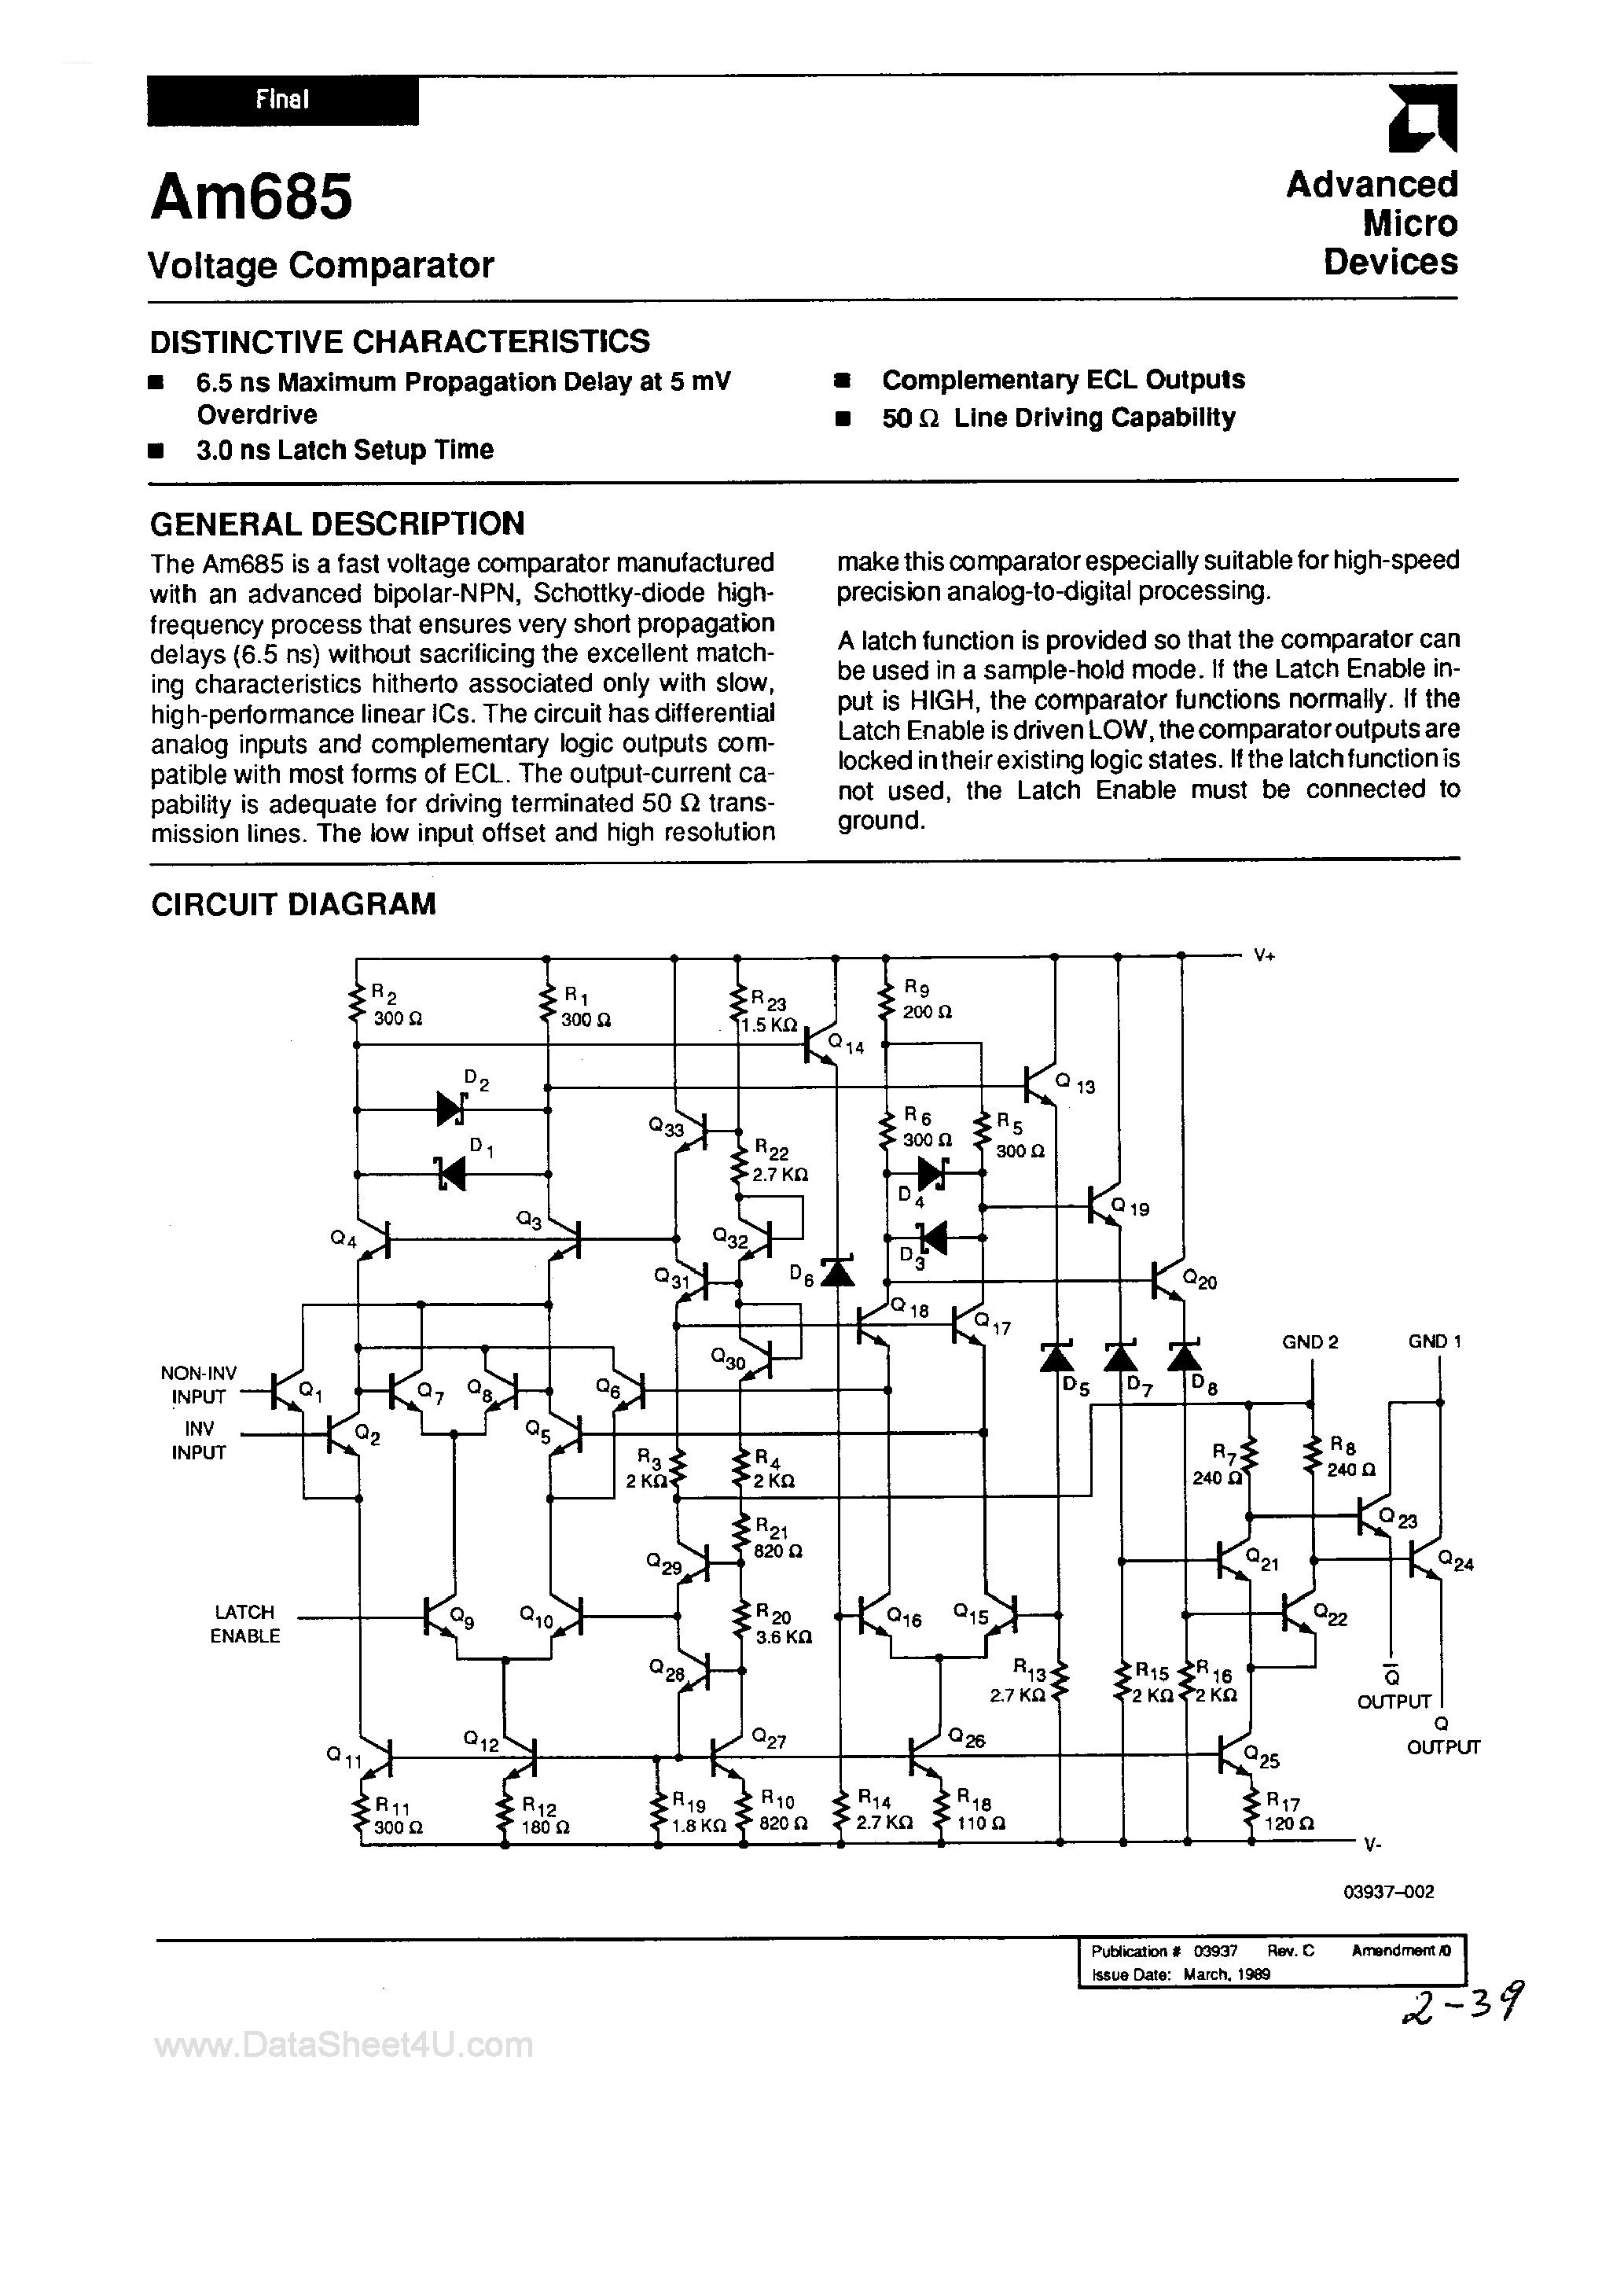 Datasheet AM685 - Voltage Comparator page 1